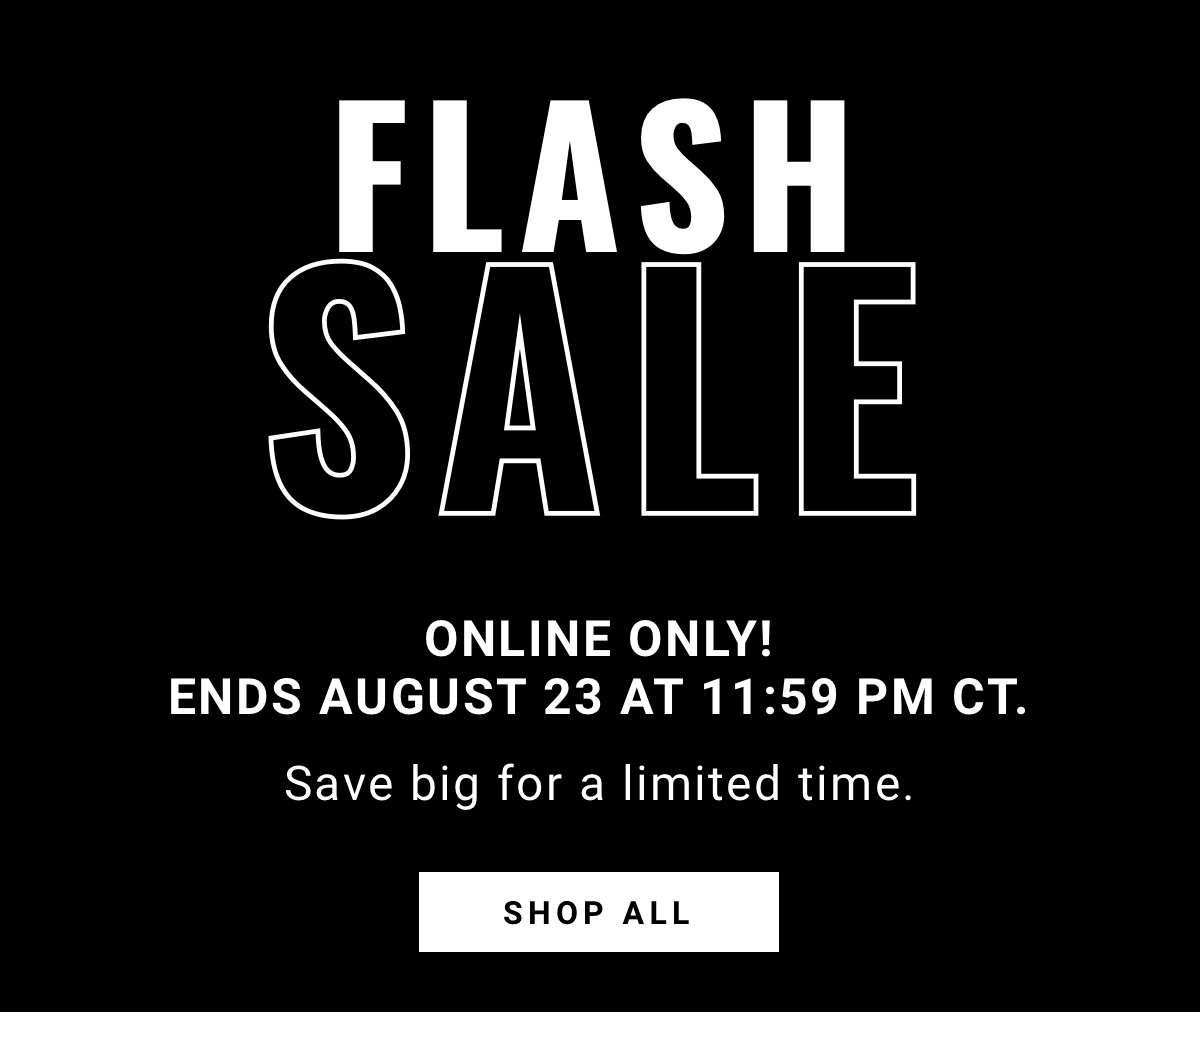 FLASH SALE | Online Only! | 2 Days to Save! Save big for a limited time. - Shop All